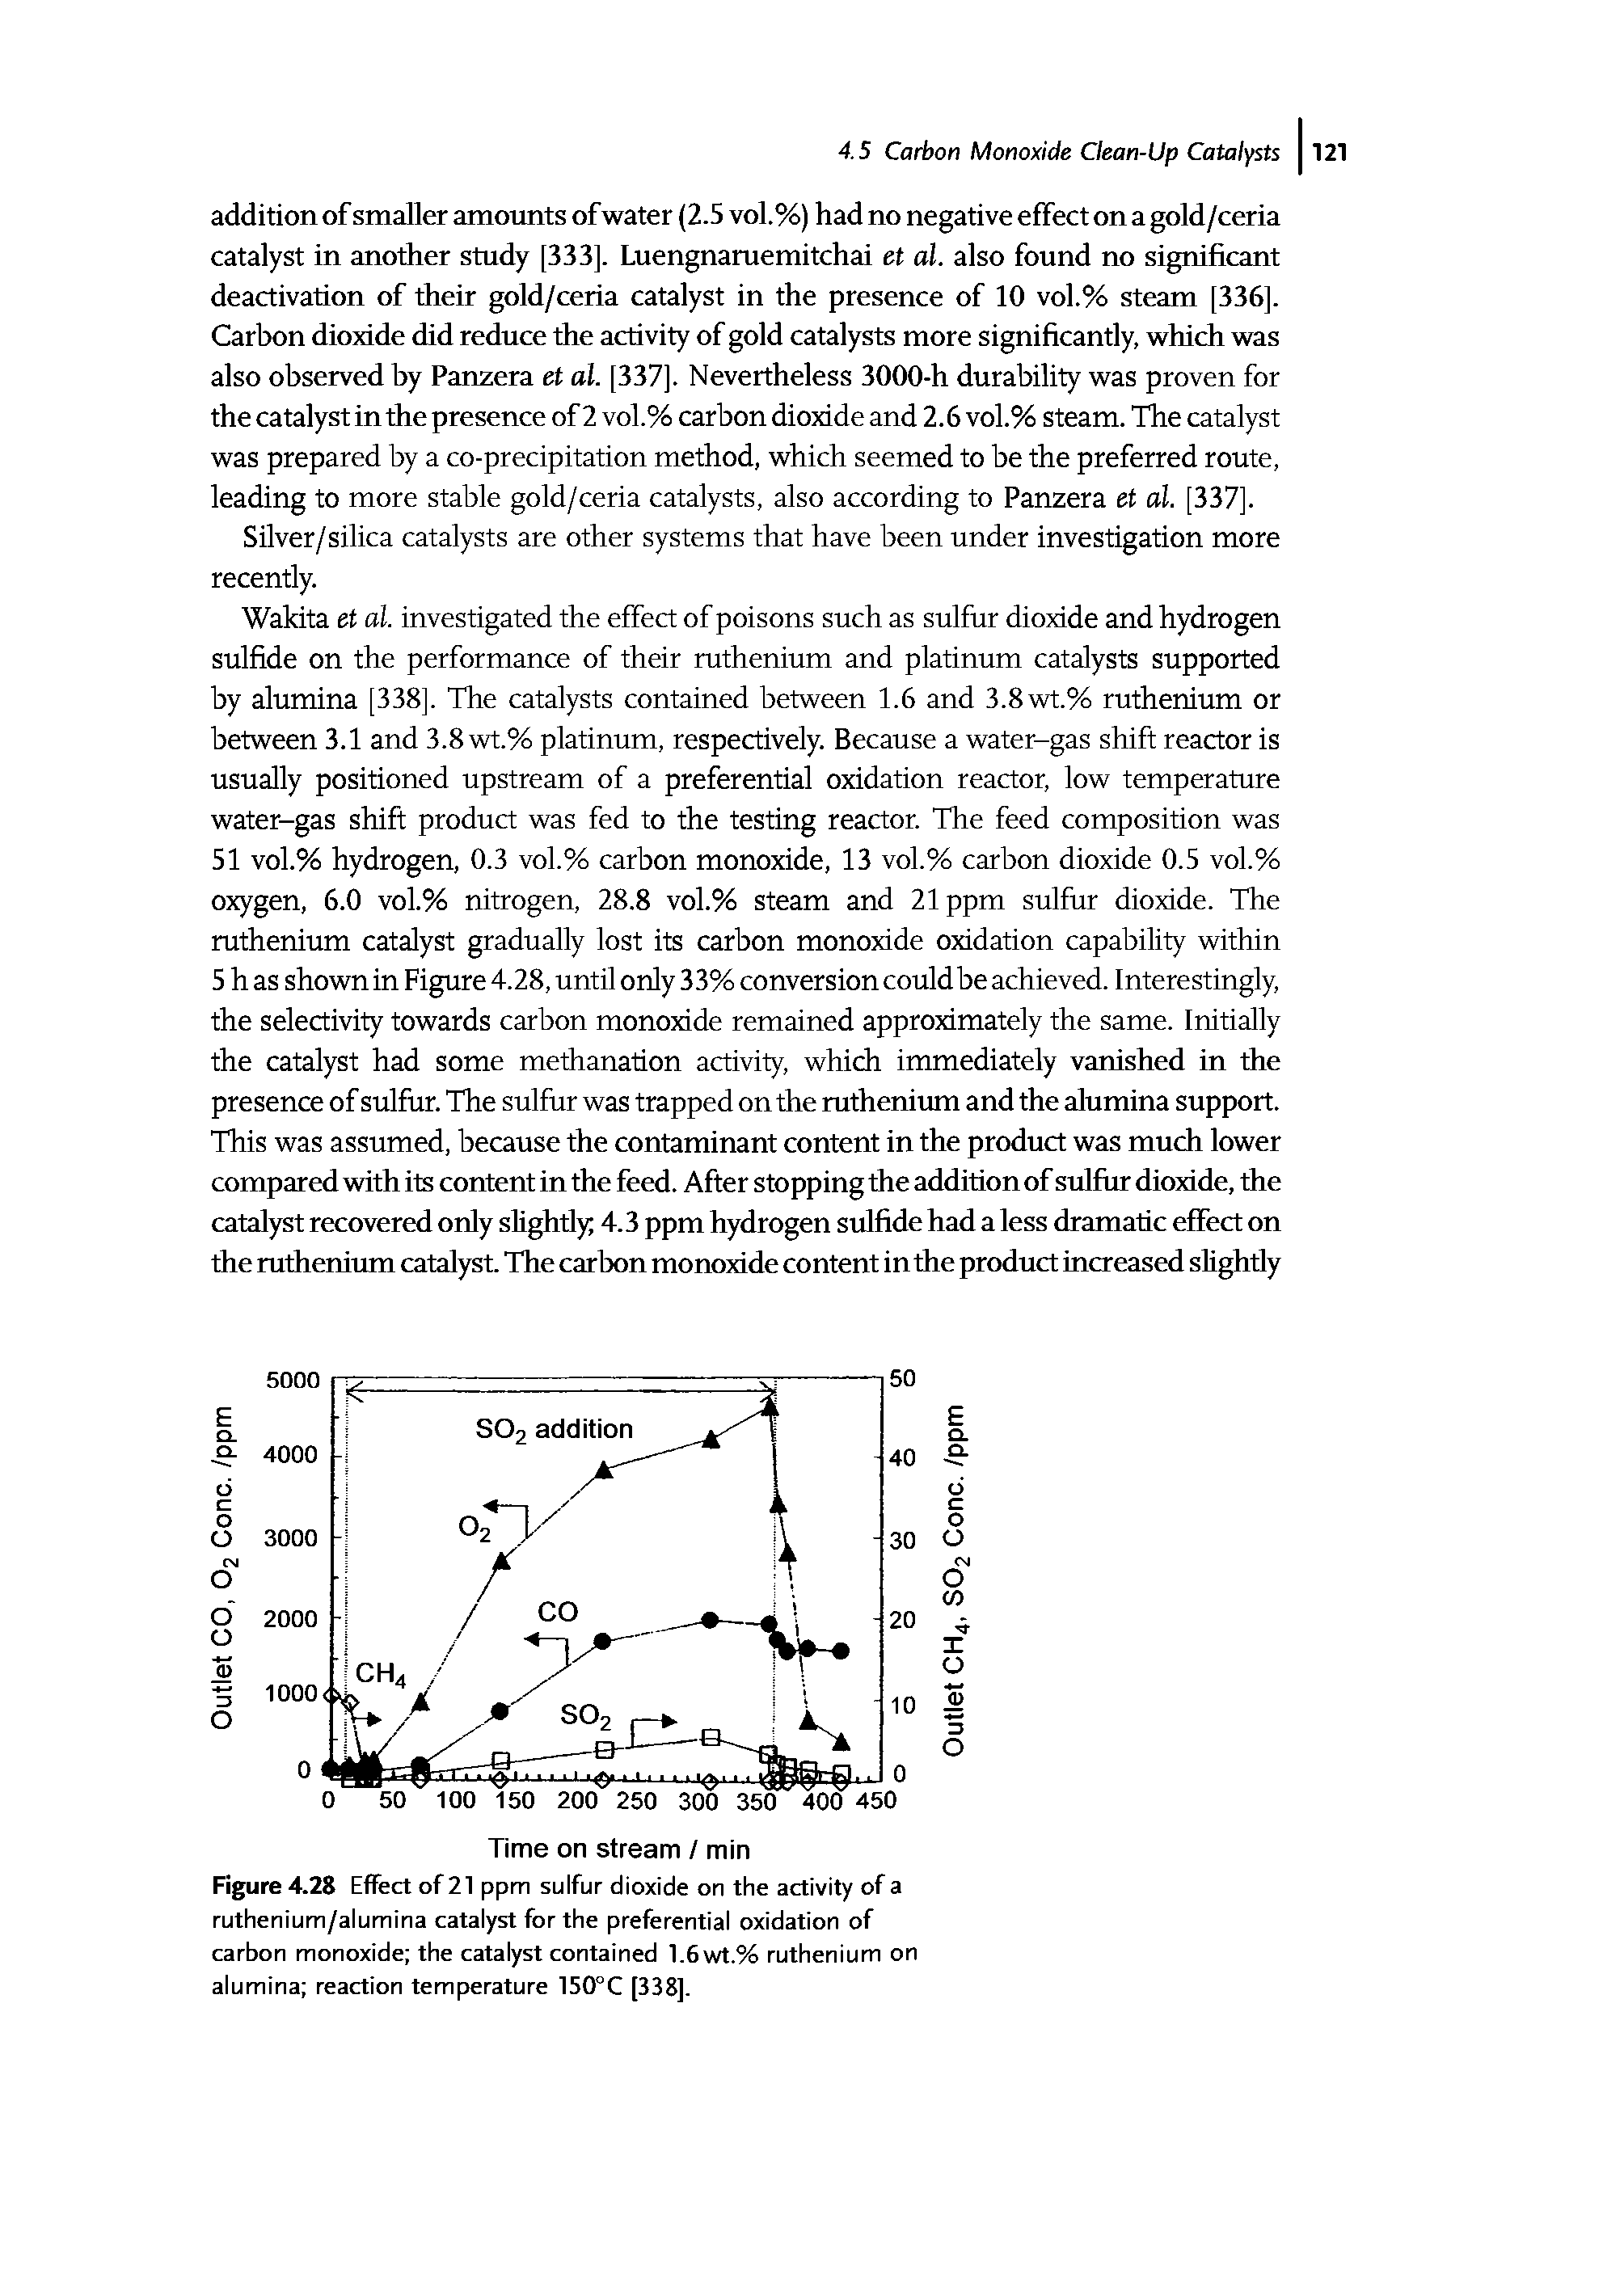 Figure 4.28 Effect of 21 ppm sulfur dioxide on the activity of a ruthenium/alumina catalyst for the preferential oxidation of carbon monoxide the catalyst contained 1.6 wt.% ruthenium on alumina reaction temperature 150°C [338].